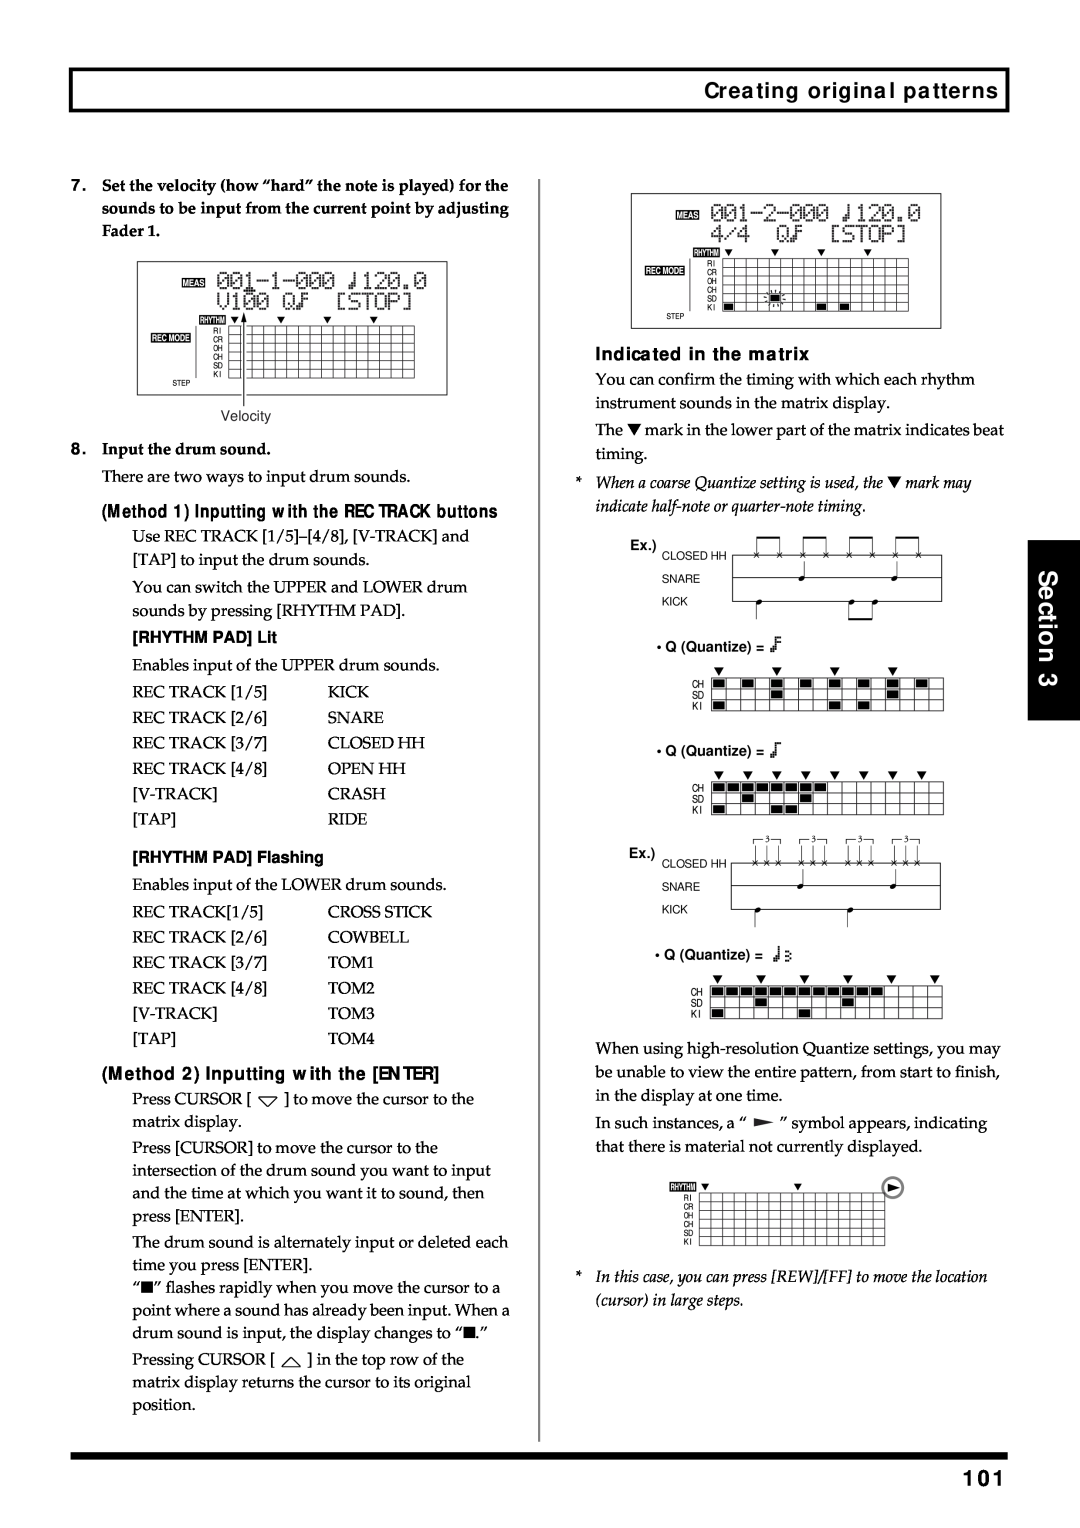 Roland BR-864 owner manual SNARE Section, Creating original patterns 